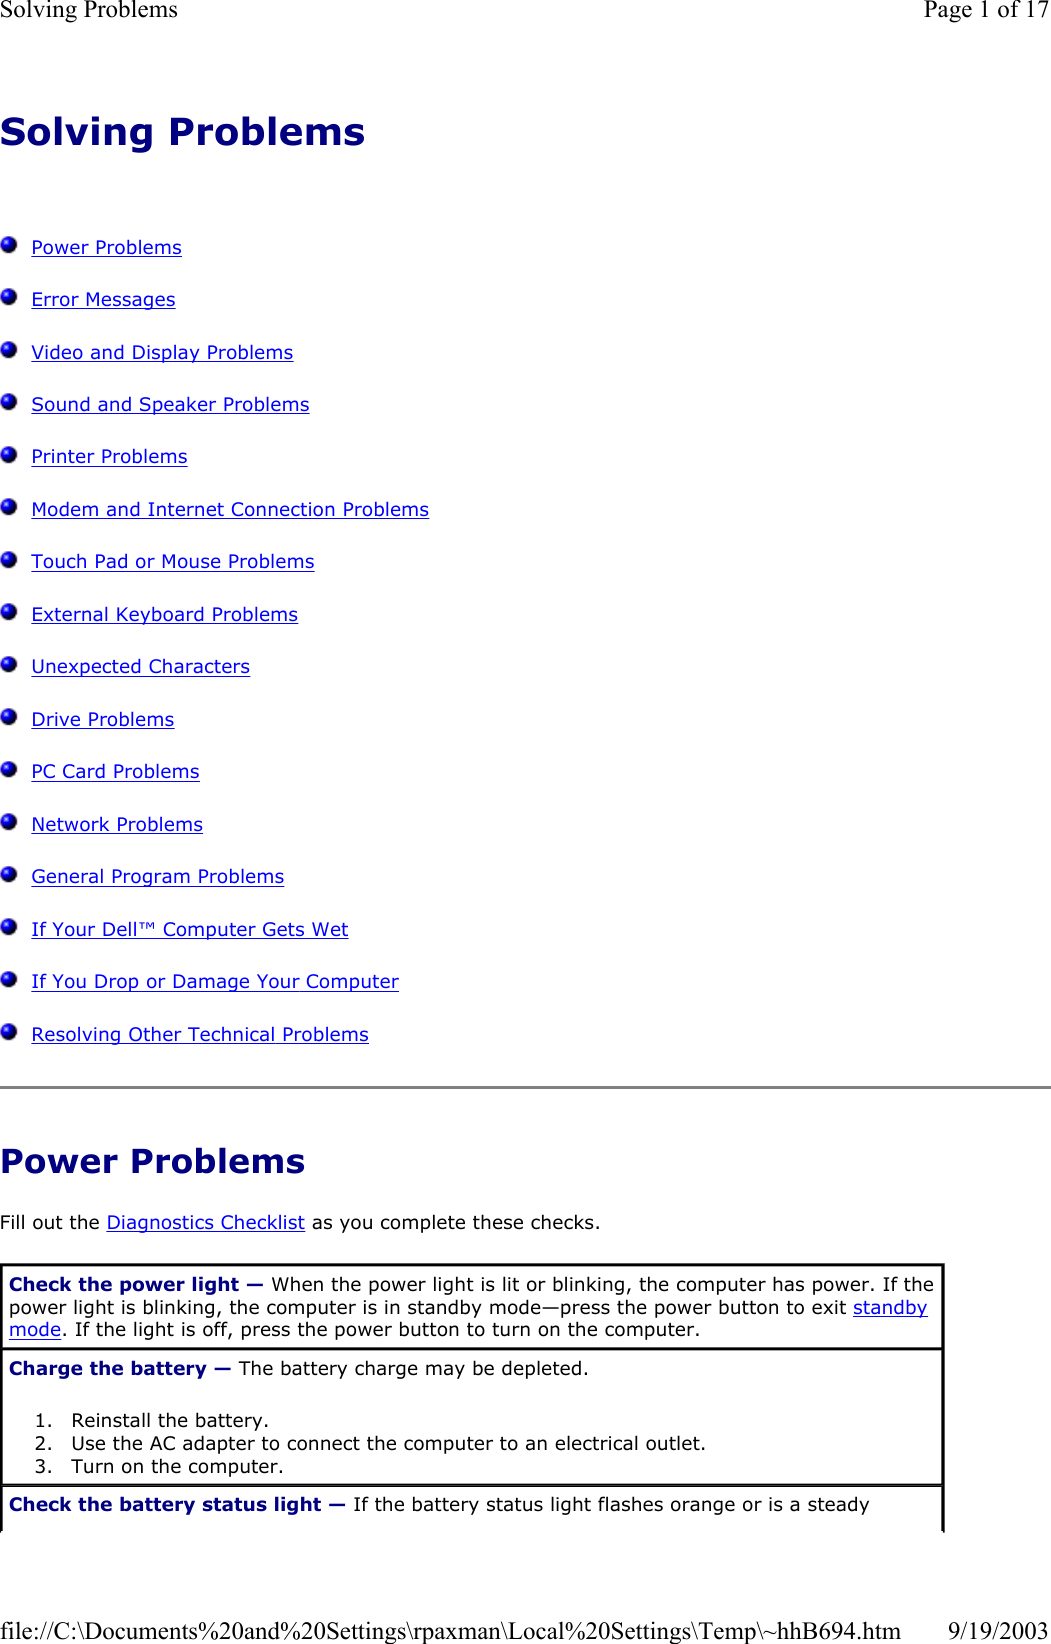 Solving Problems      Power Problems   Error Messages   Video and Display Problems   Sound and Speaker Problems   Printer Problems   Modem and Internet Connection Problems   Touch Pad or Mouse Problems   External Keyboard Problems   Unexpected Characters   Drive Problems   PC Card Problems   Network Problems   General Program Problems   If Your Dell™ Computer Gets Wet   If You Drop or Damage Your Computer   Resolving Other Technical Problems Power Problems Fill out the Diagnostics Checklist as you complete these checks. Check the power light — When the power light is lit or blinking, the computer has power. If the power light is blinking, the computer is in standby mode—press the power button to exit standby mode. If the light is off, press the power button to turn on the computer. Charge the battery — The battery charge may be depleted. 1. Reinstall the battery.  2. Use the AC adapter to connect the computer to an electrical outlet.  3. Turn on the computer.  Check the battery status light — If the battery status light flashes orange or is a steady Page 1 of 17Solving Problems9/19/2003file://C:\Documents%20and%20Settings\rpaxman\Local%20Settings\Temp\~hhB694.htm